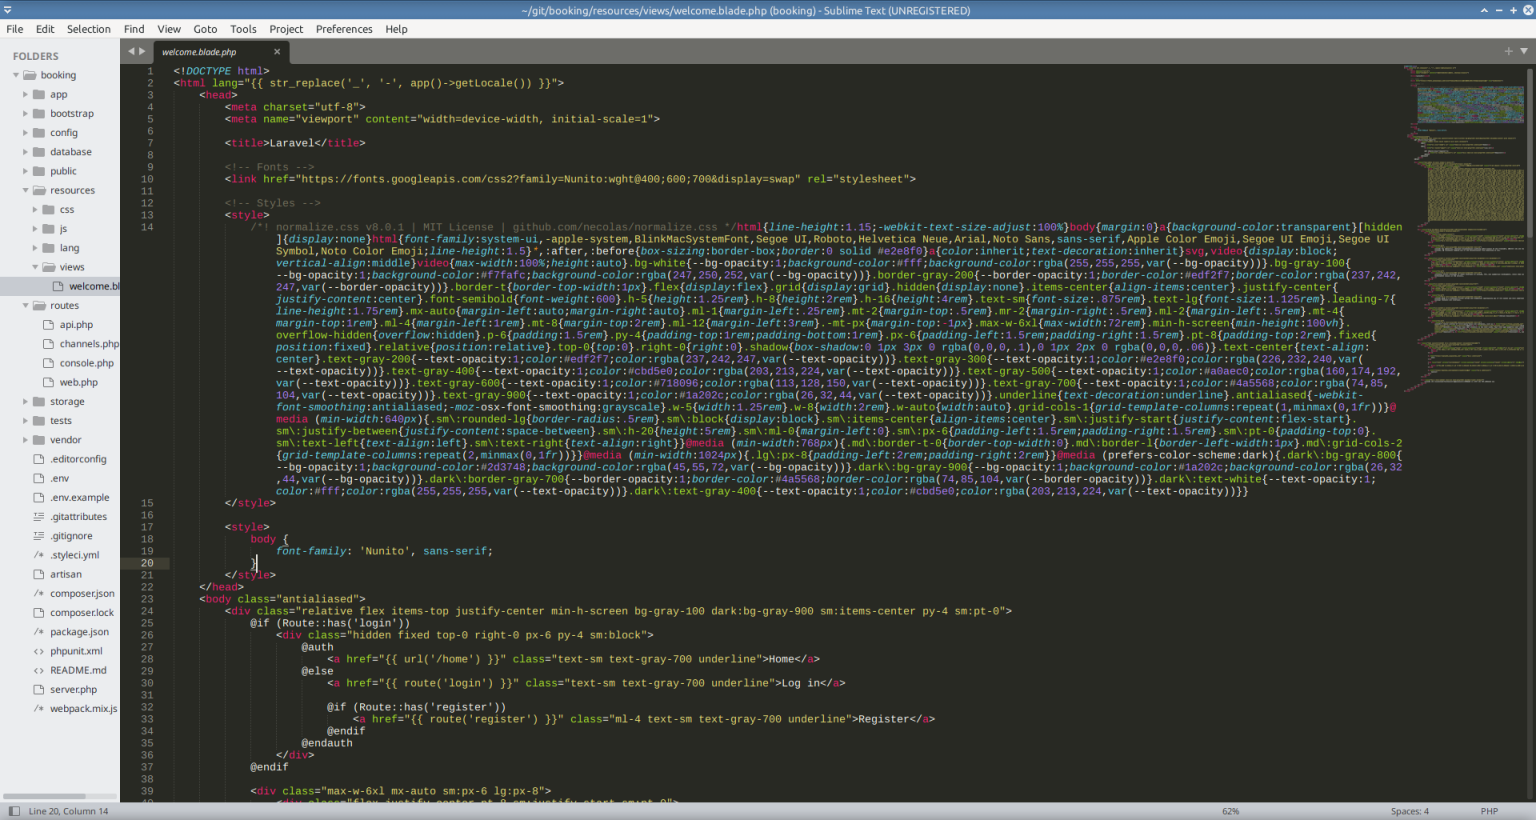 Sublime Text 4.4151 for ios instal